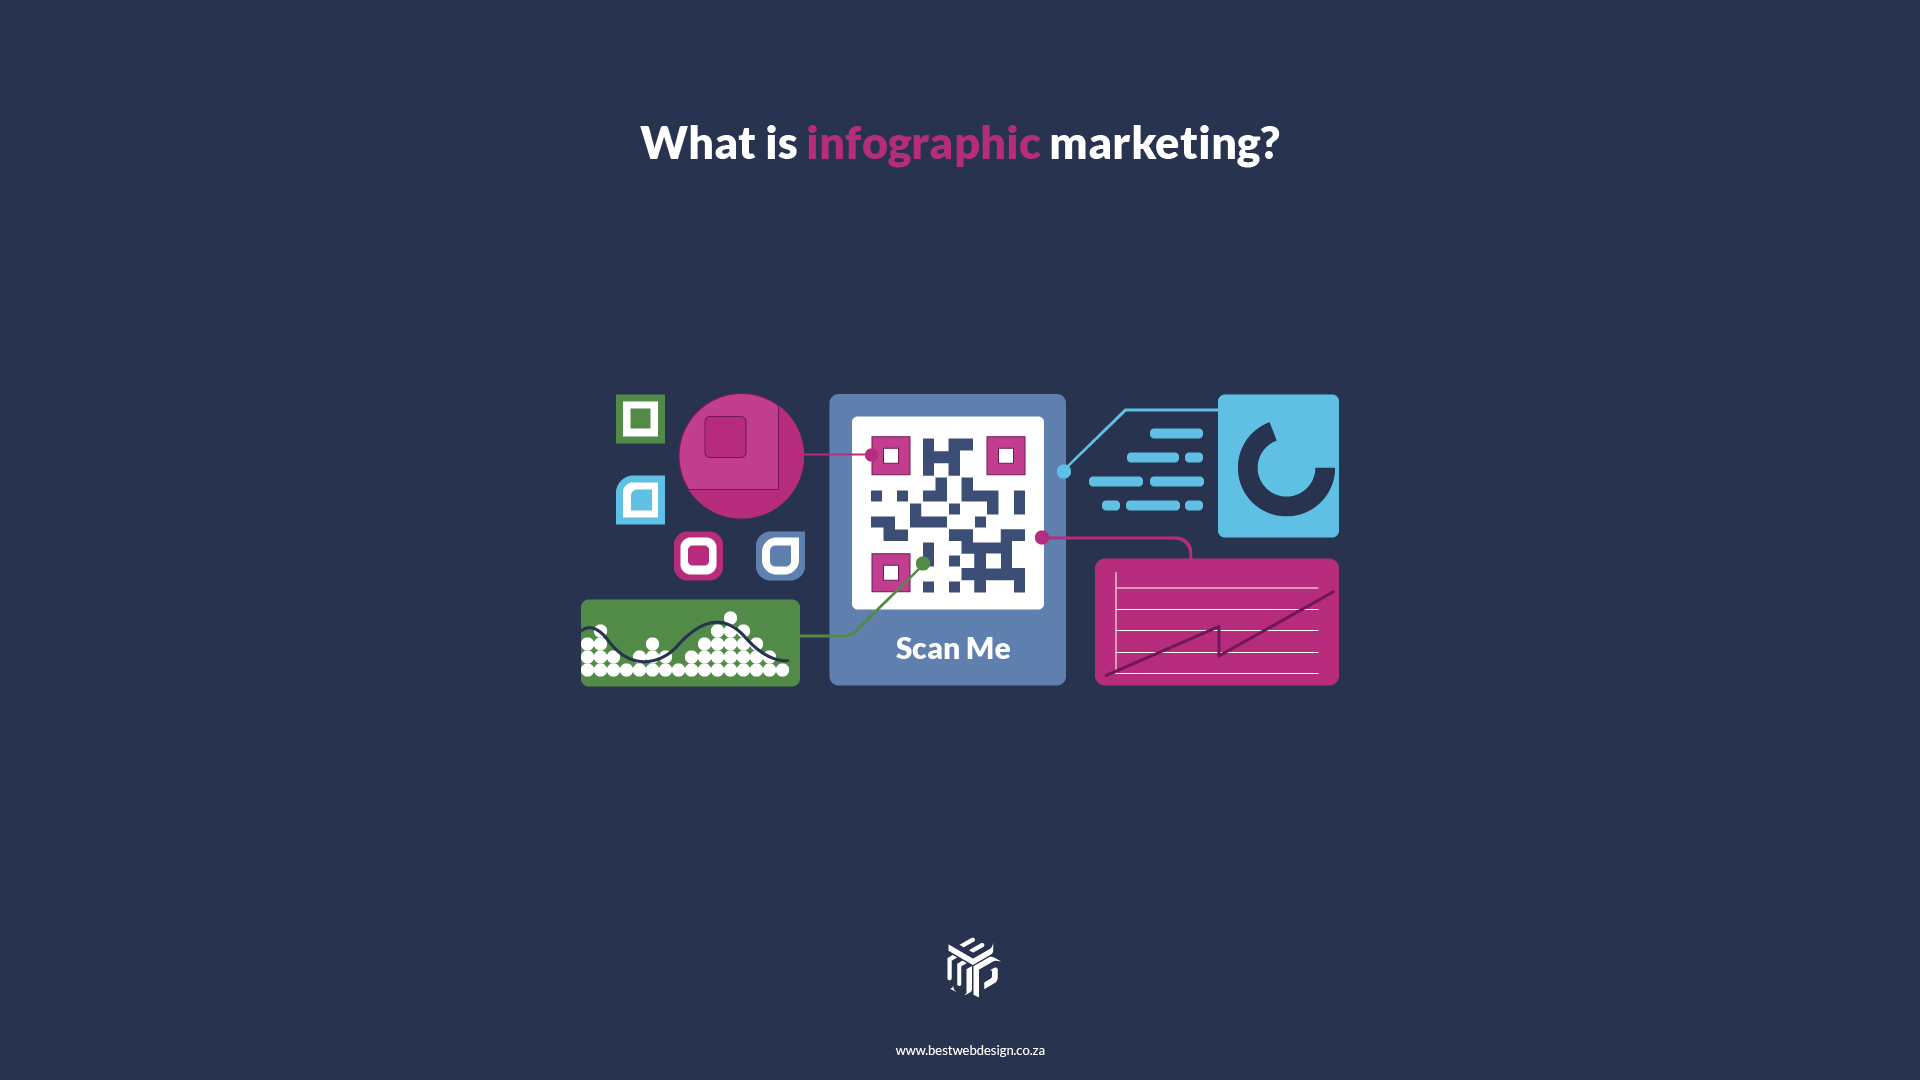 have you ever wondered why infographic marketing is essential, and even more so, how can you measure its effectiveness?